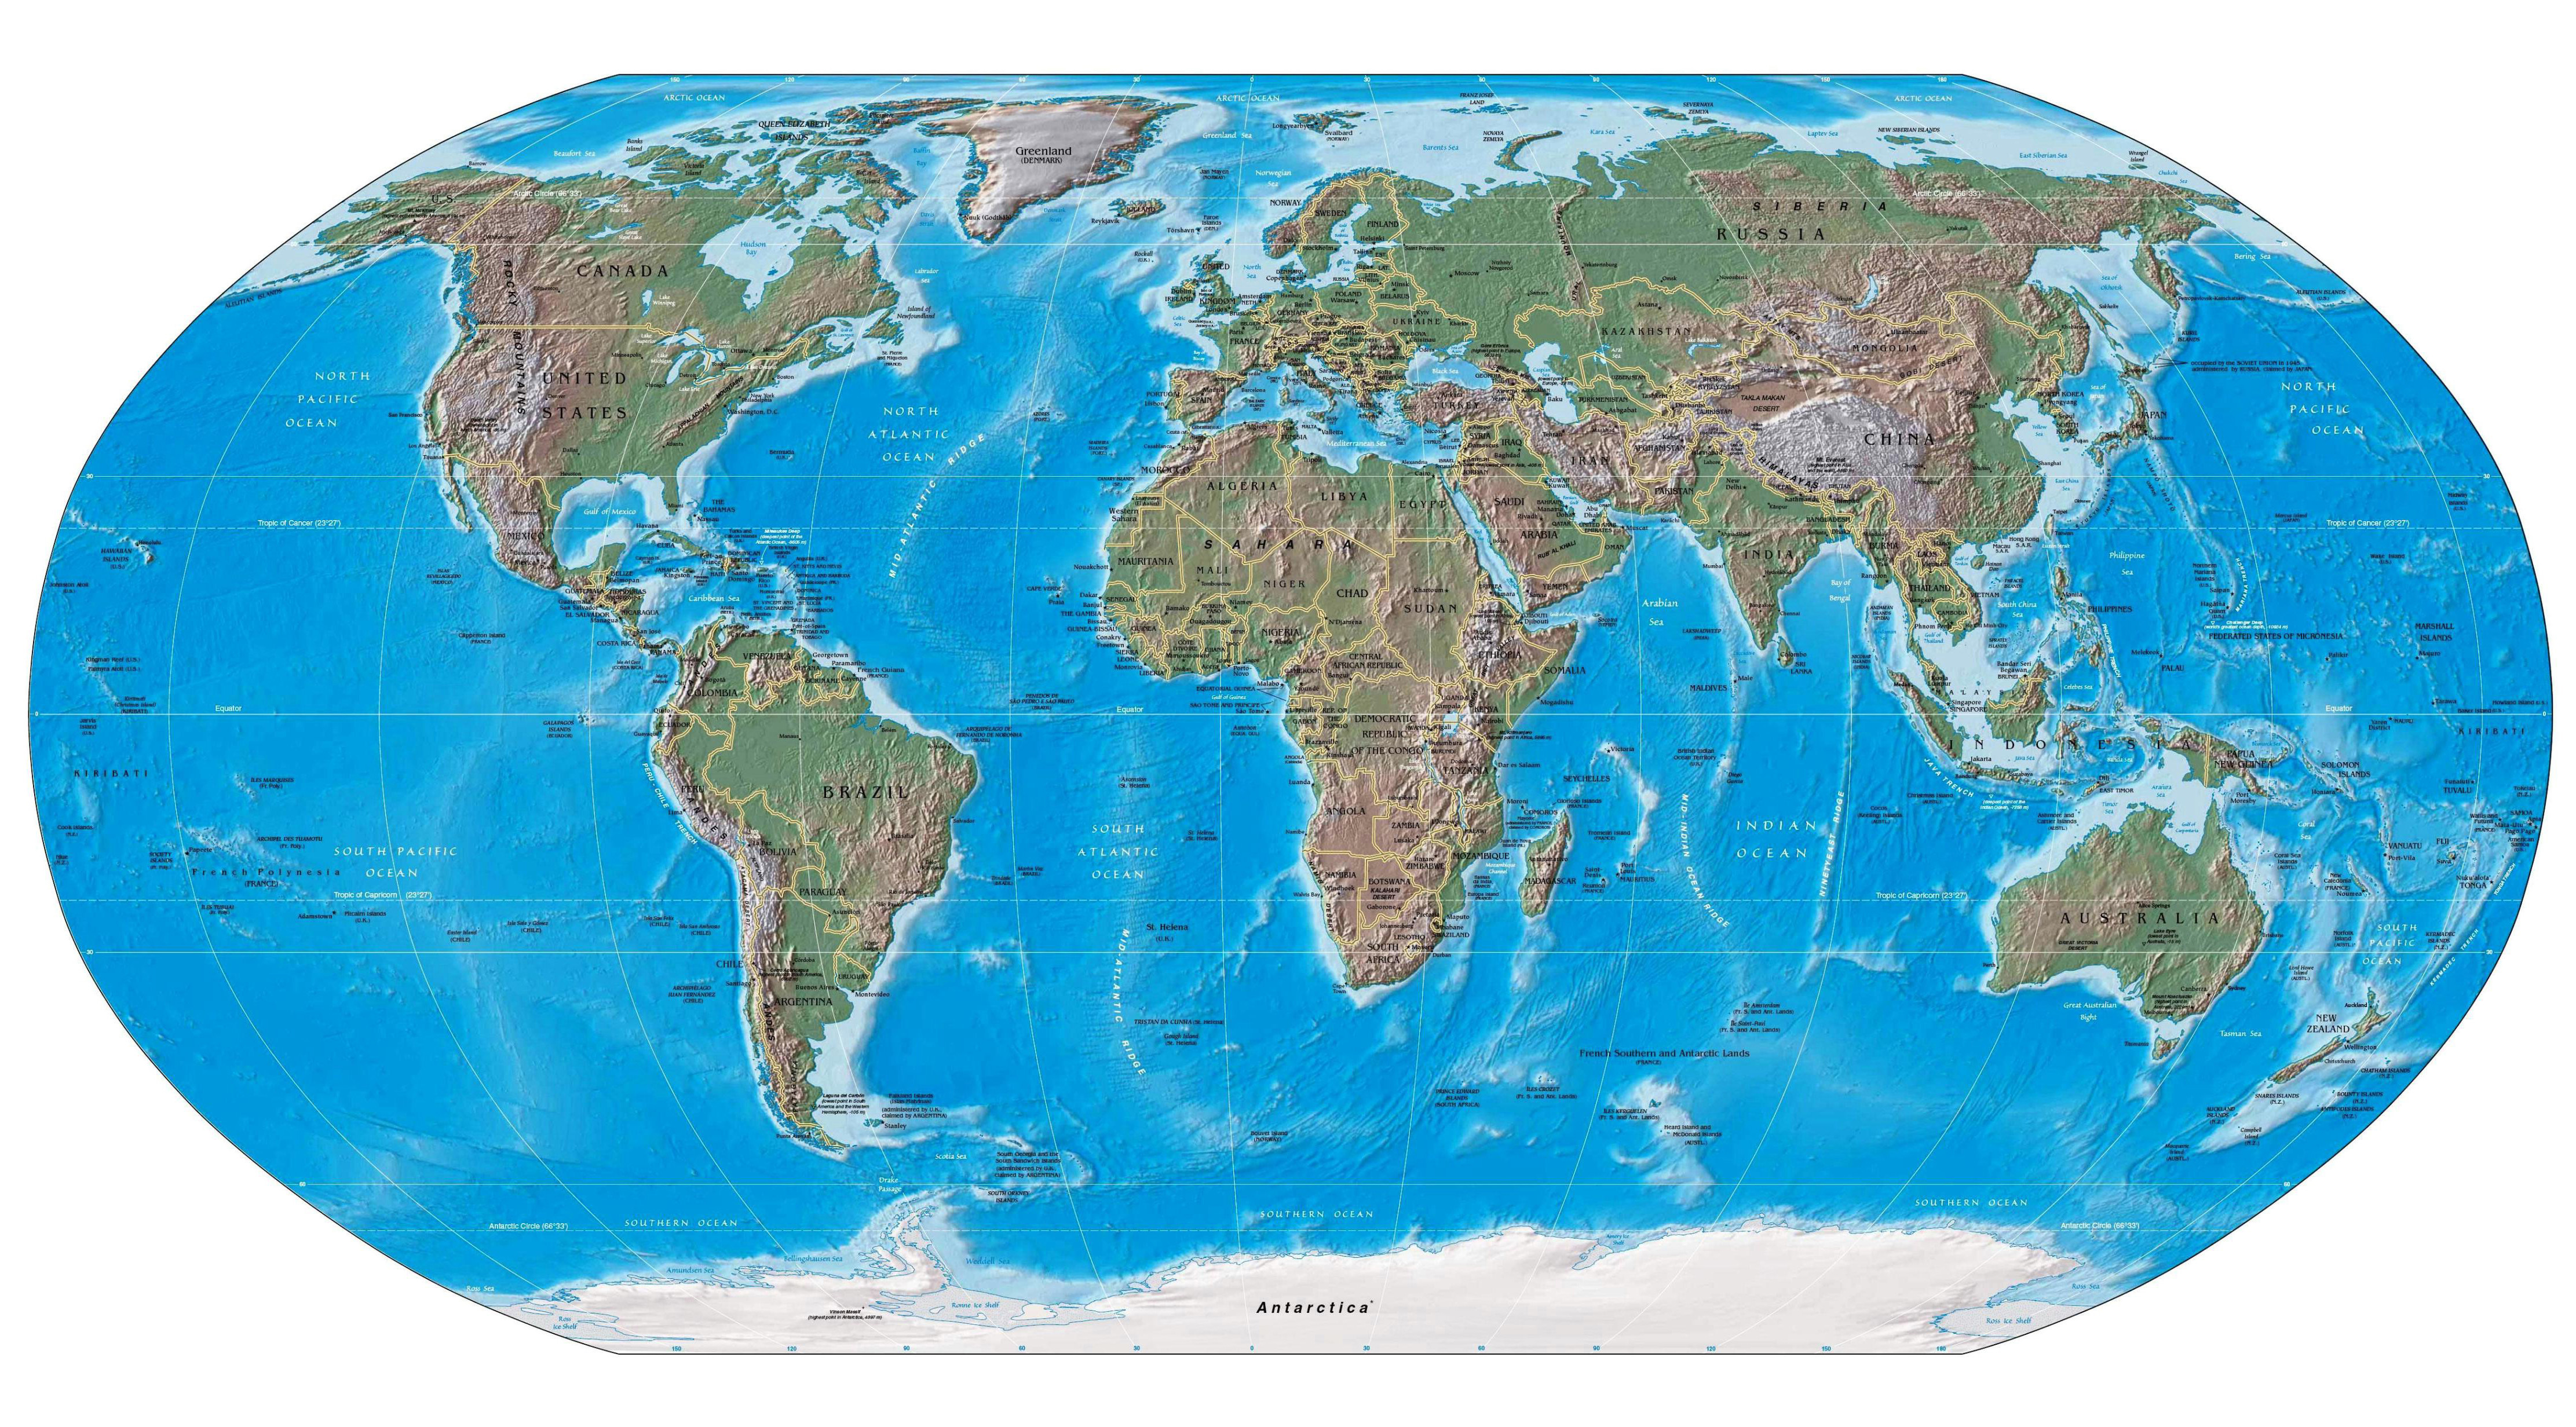 relief map of the world Large Detailed Political And Relief Map Of The World Large relief map of the world